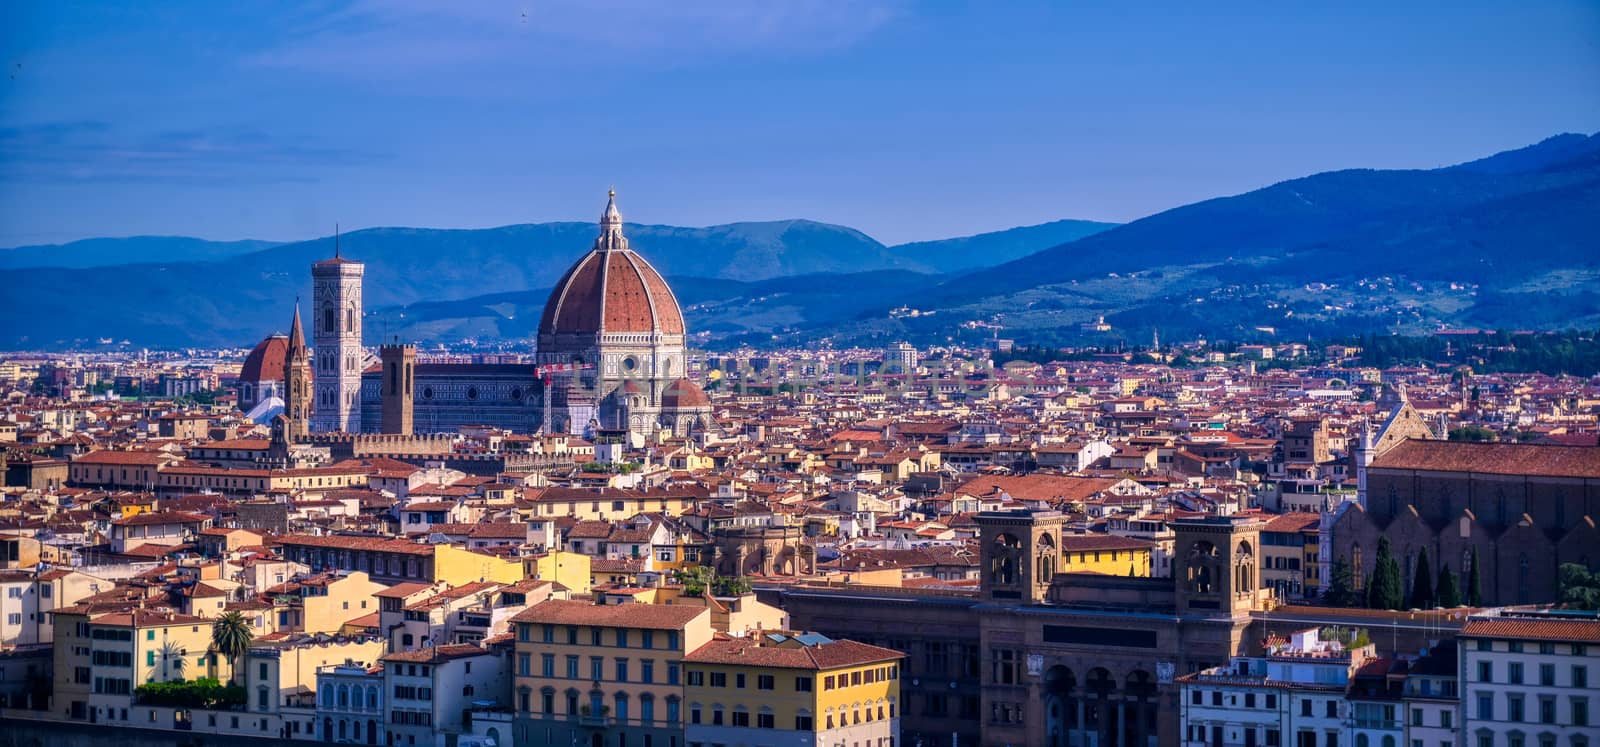 Aerial view of Florence, Italy by jbyard22